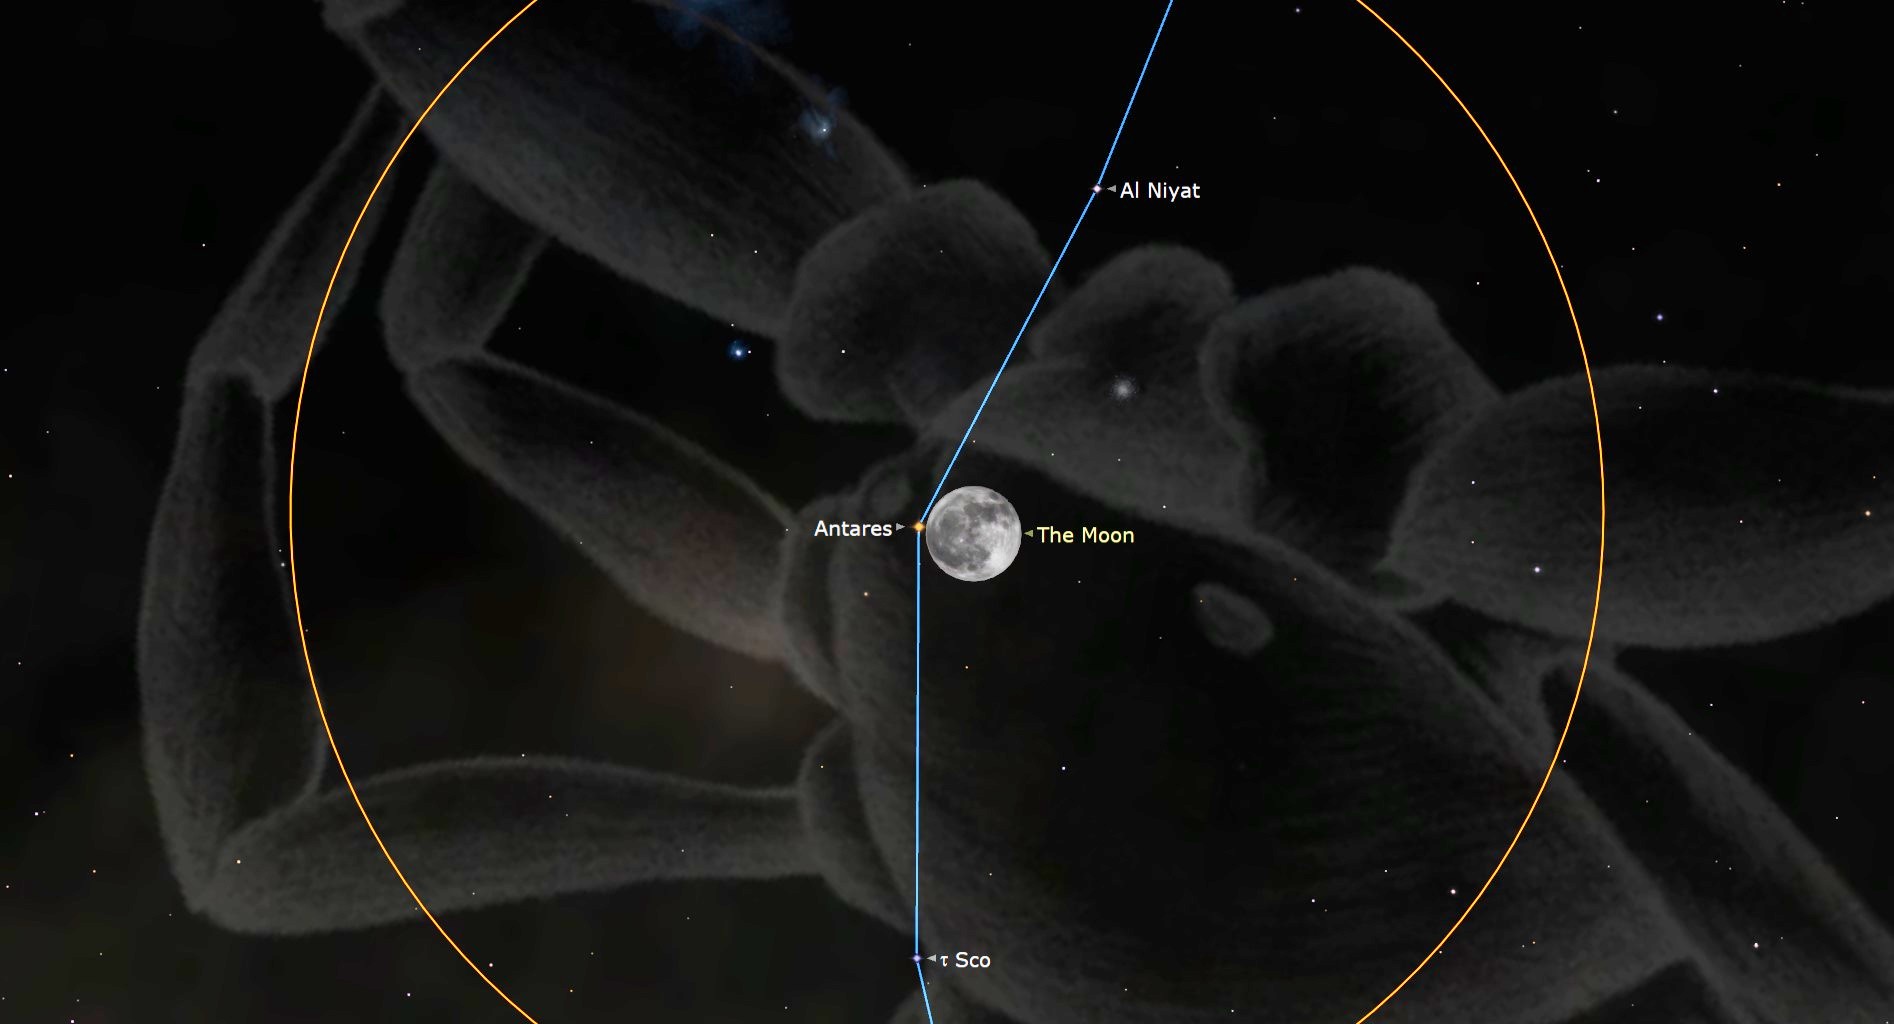 How to watch bright red star Antares disappear behind the moon on May 23 Space